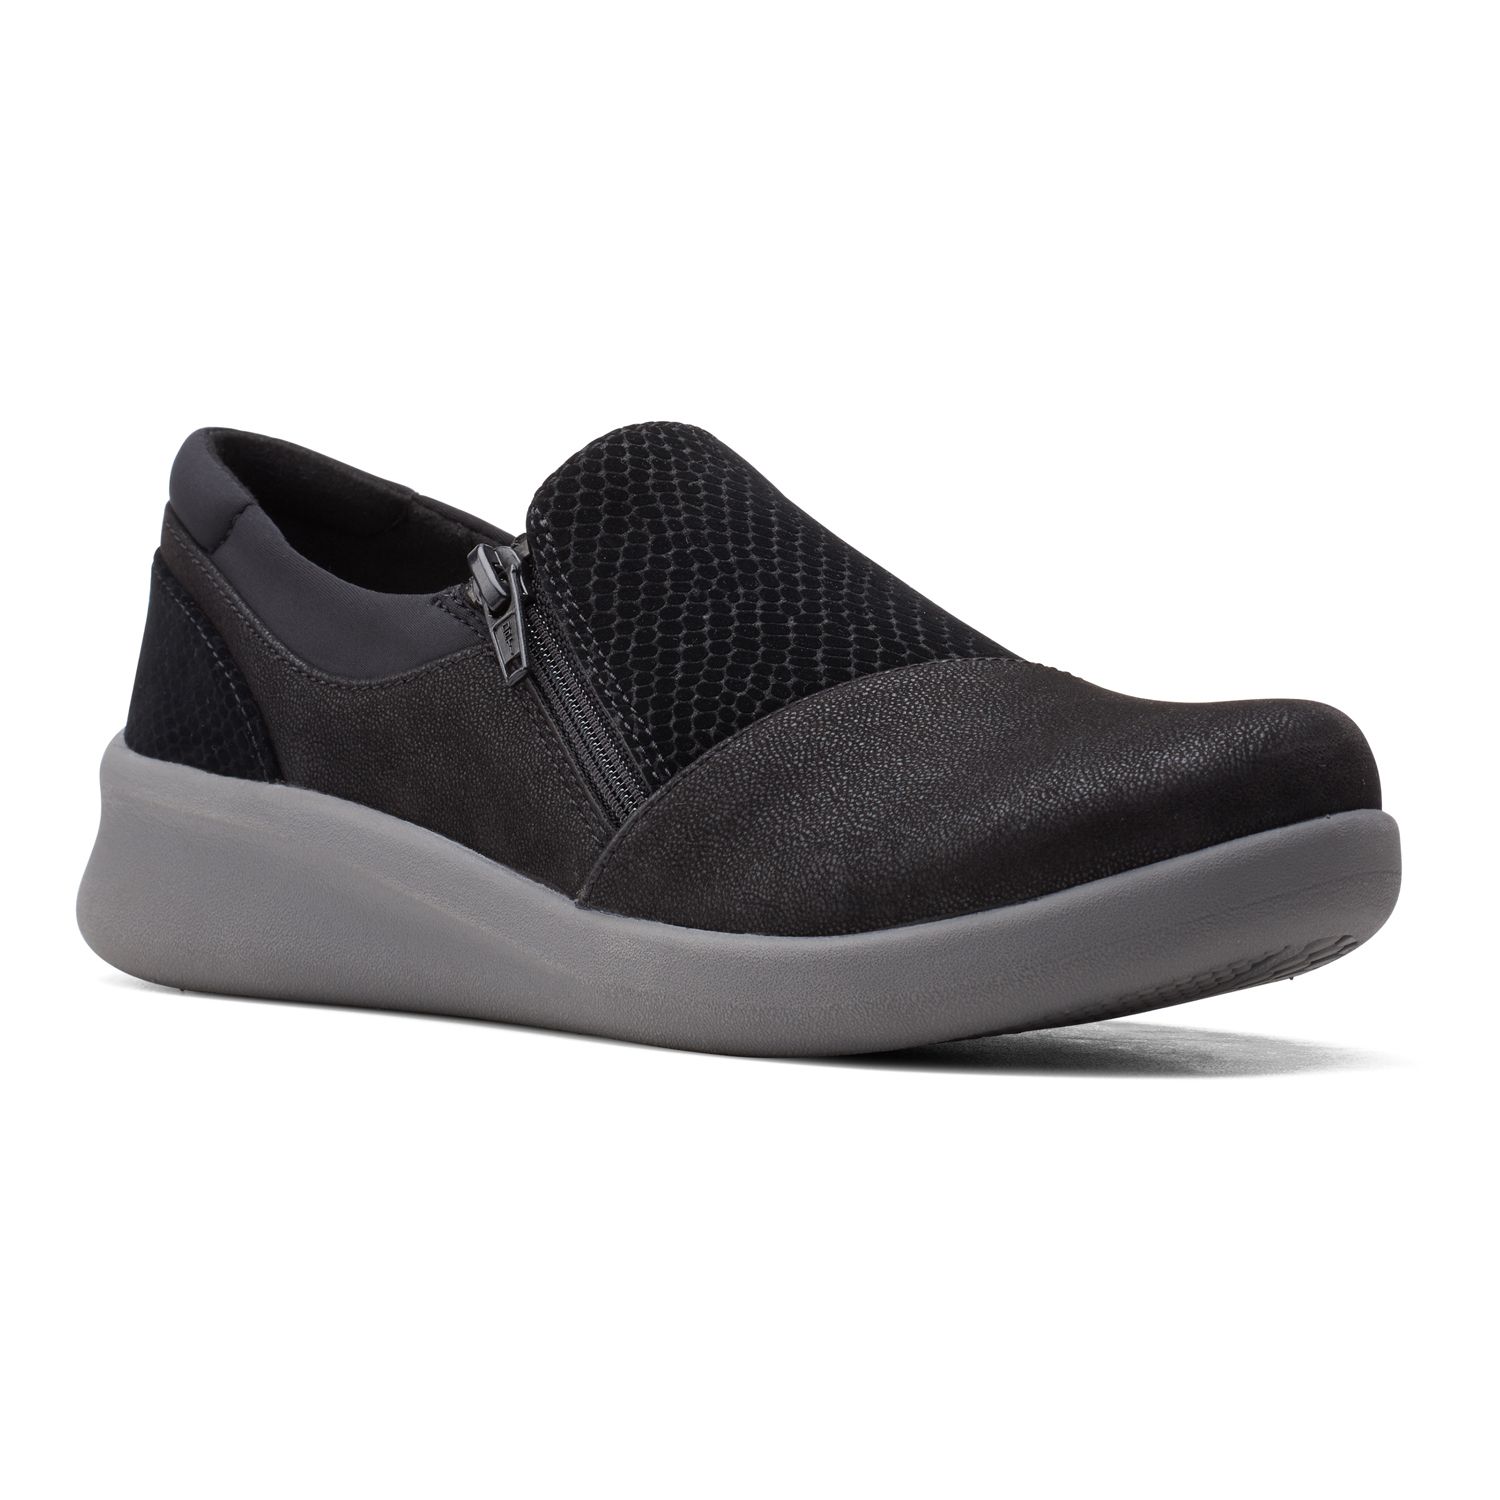 Clarks® Cloudsteppers Sillian 2.0 Day 